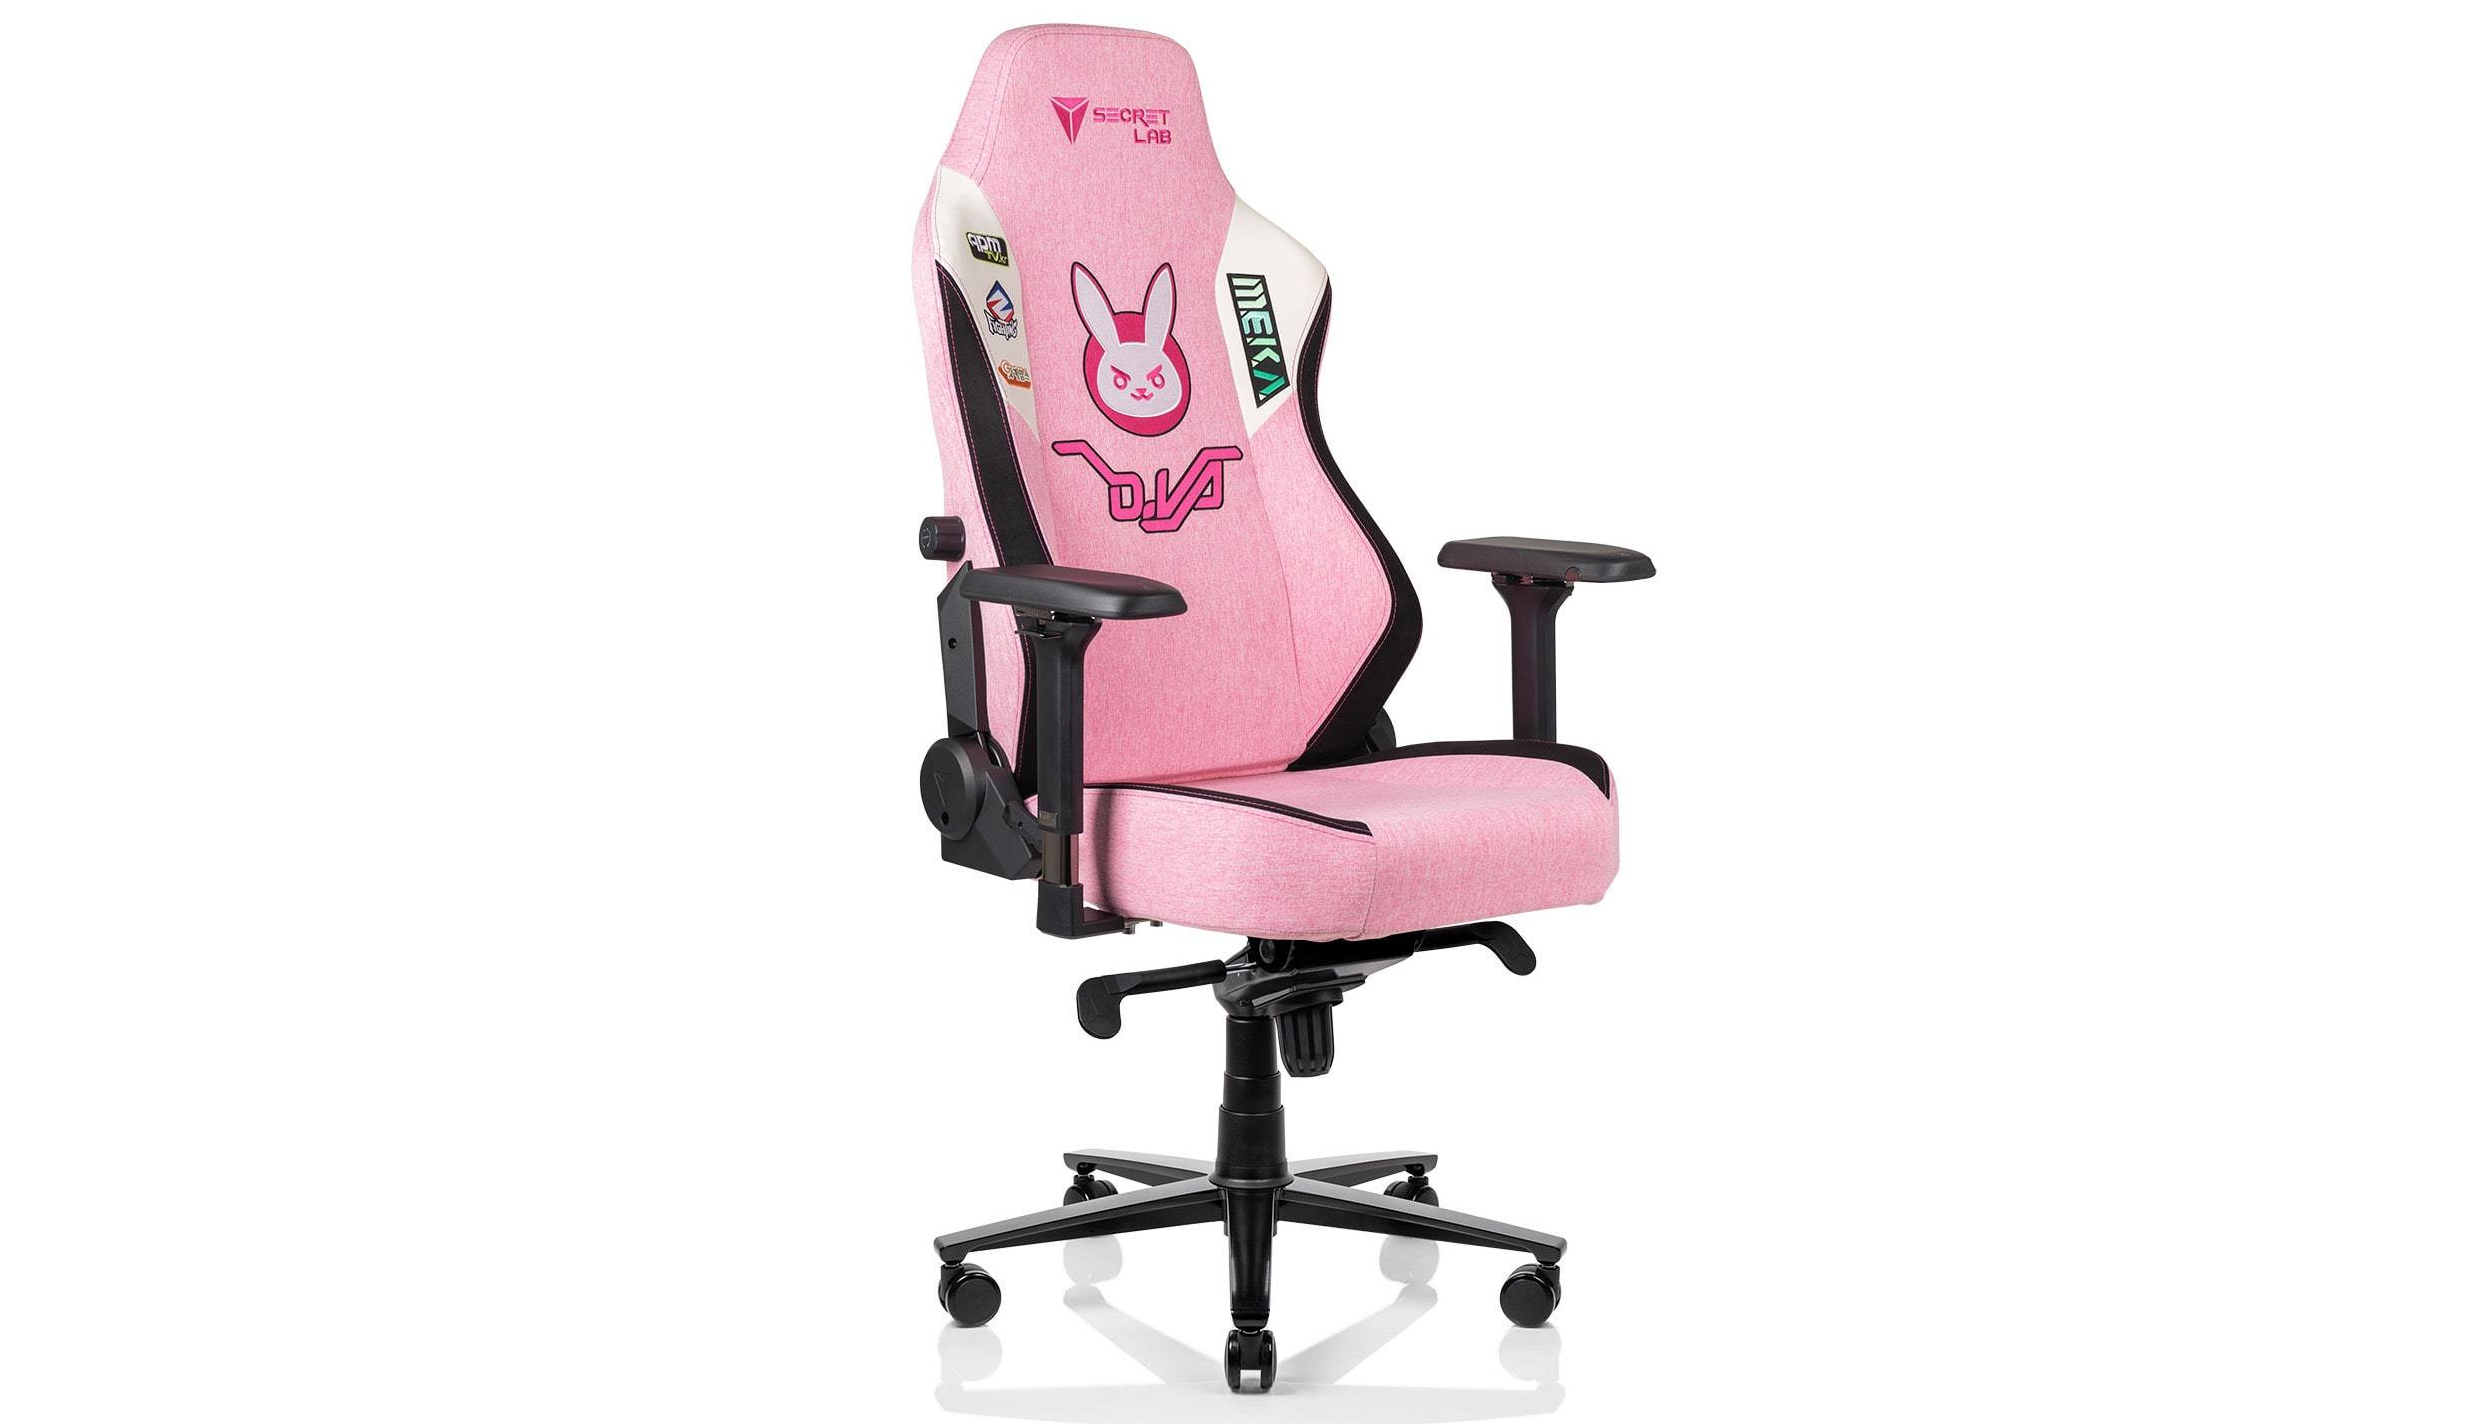 I Refuse To Regret Spending $750 On A Bright Pink Gamer Chair